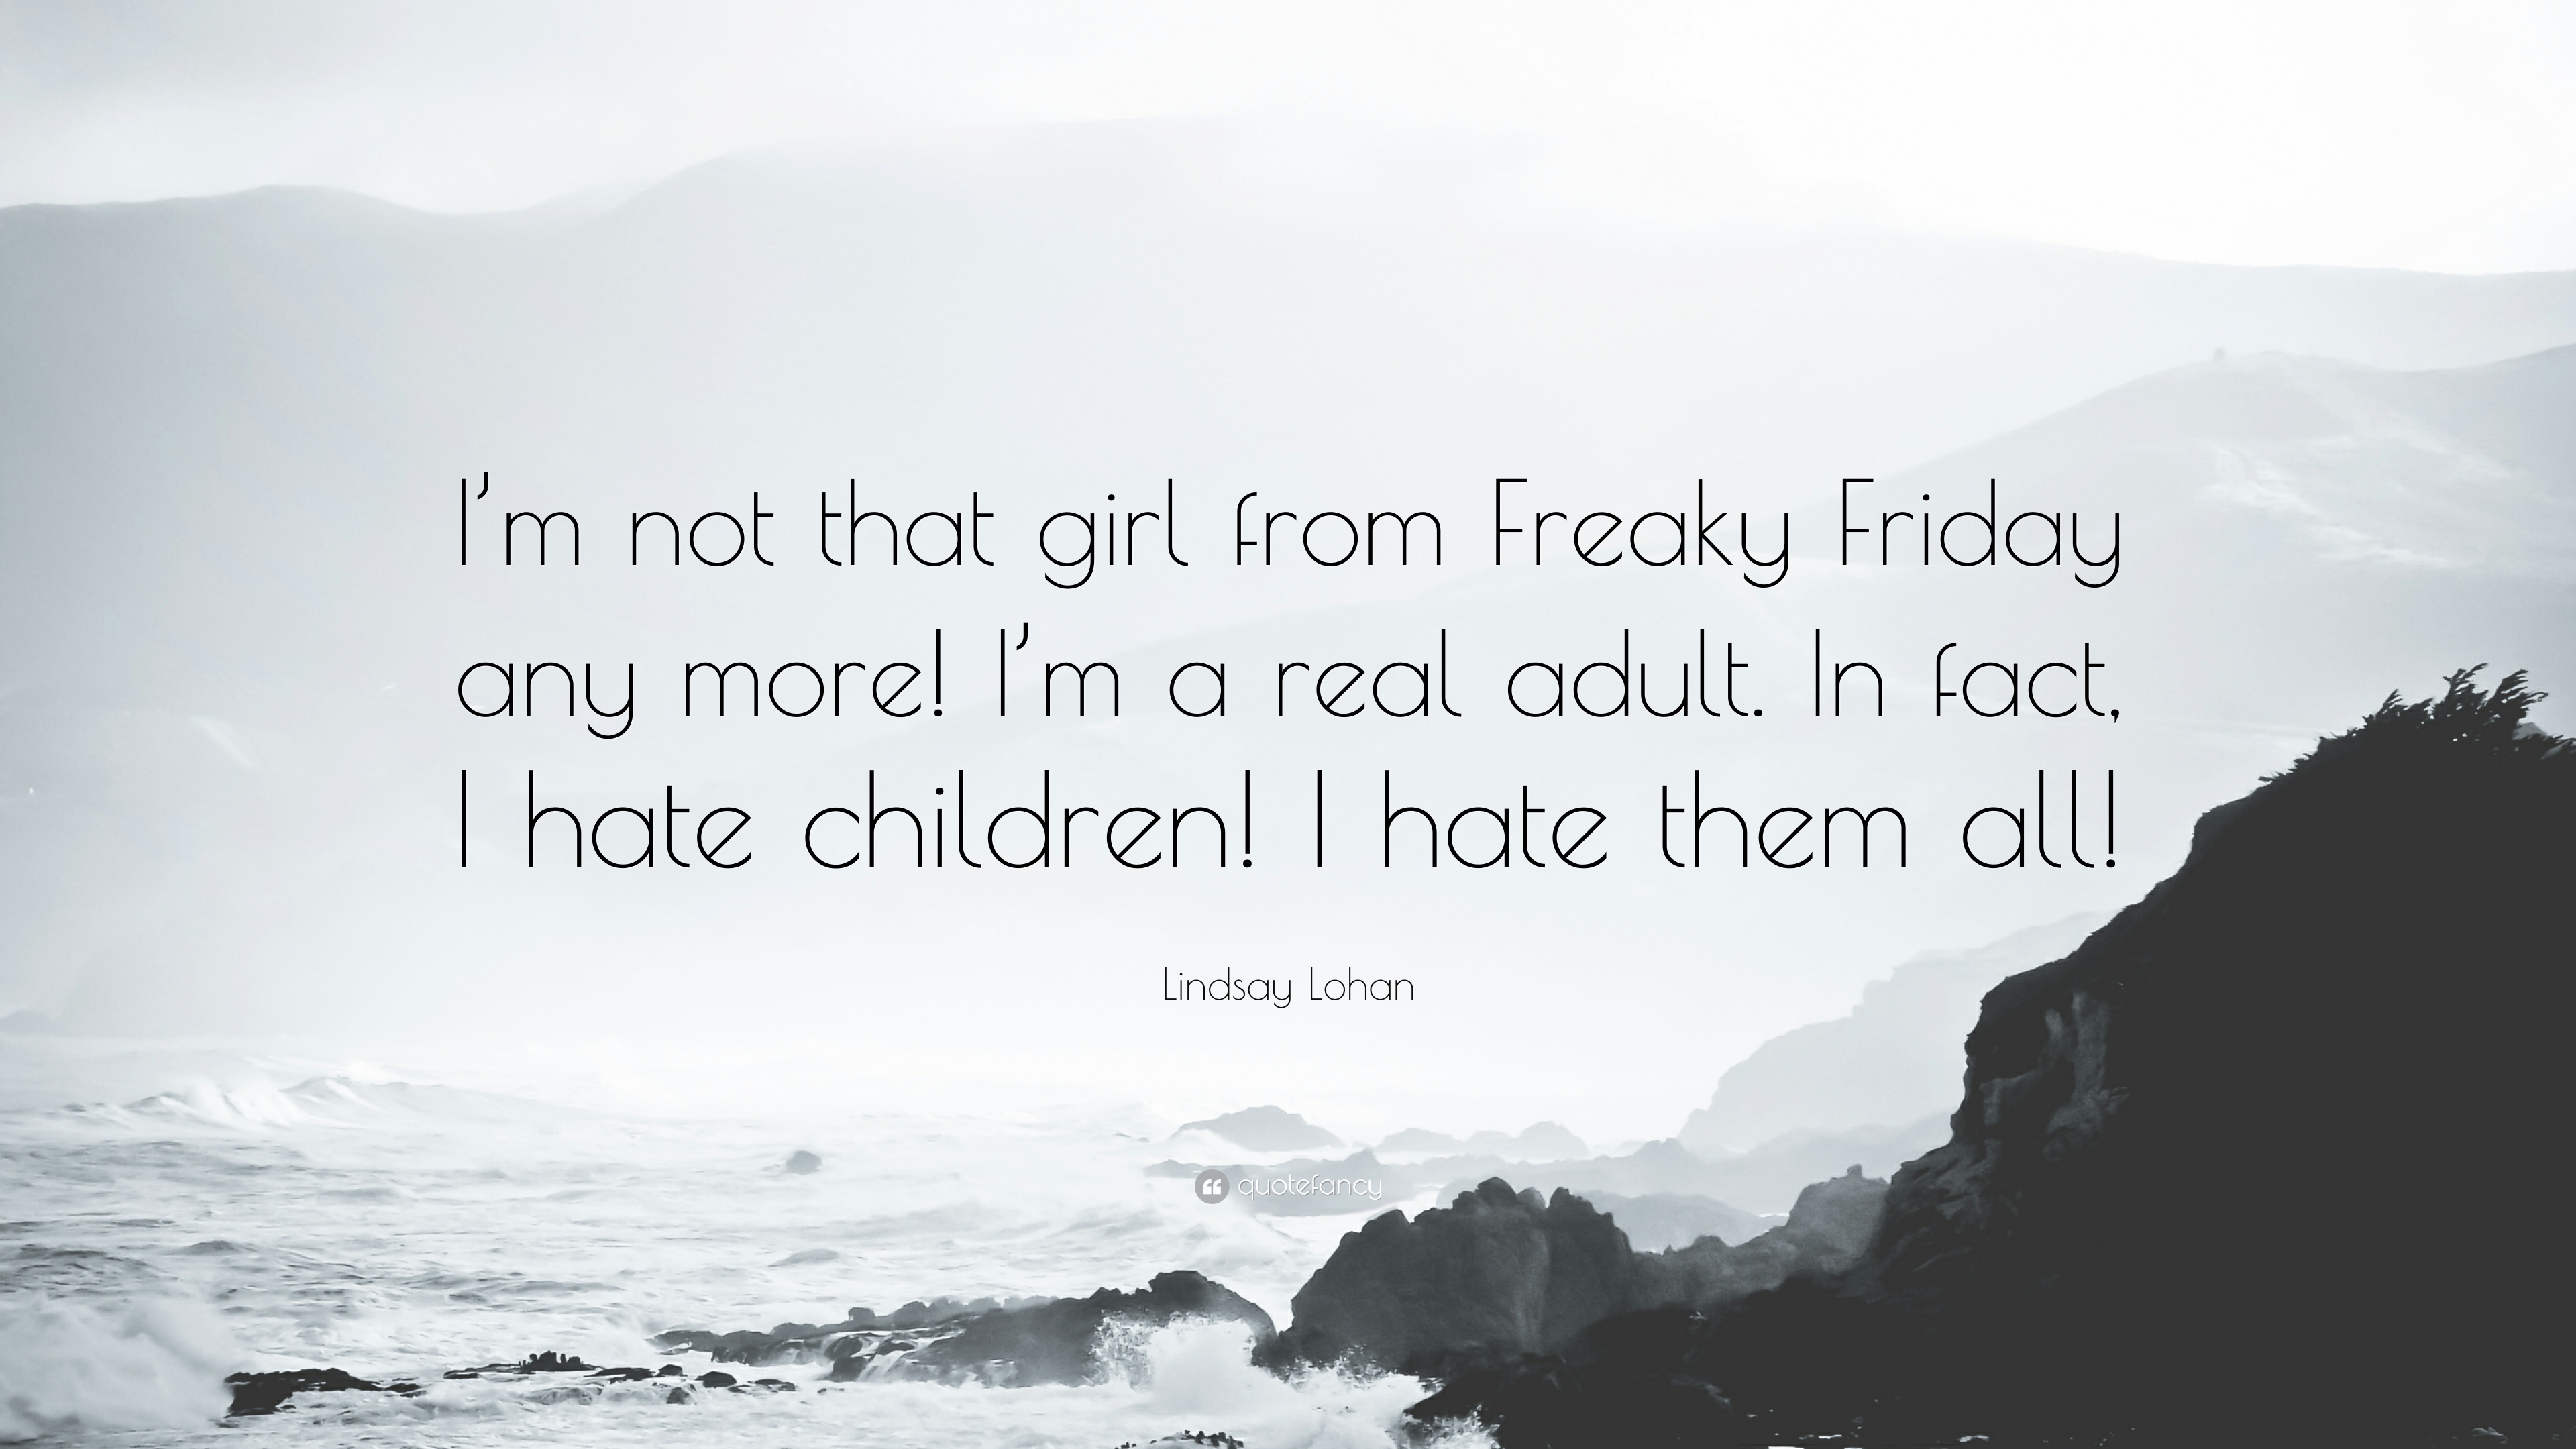 Lindsay Lohan Quote: “I'm not that girl from Freaky Friday